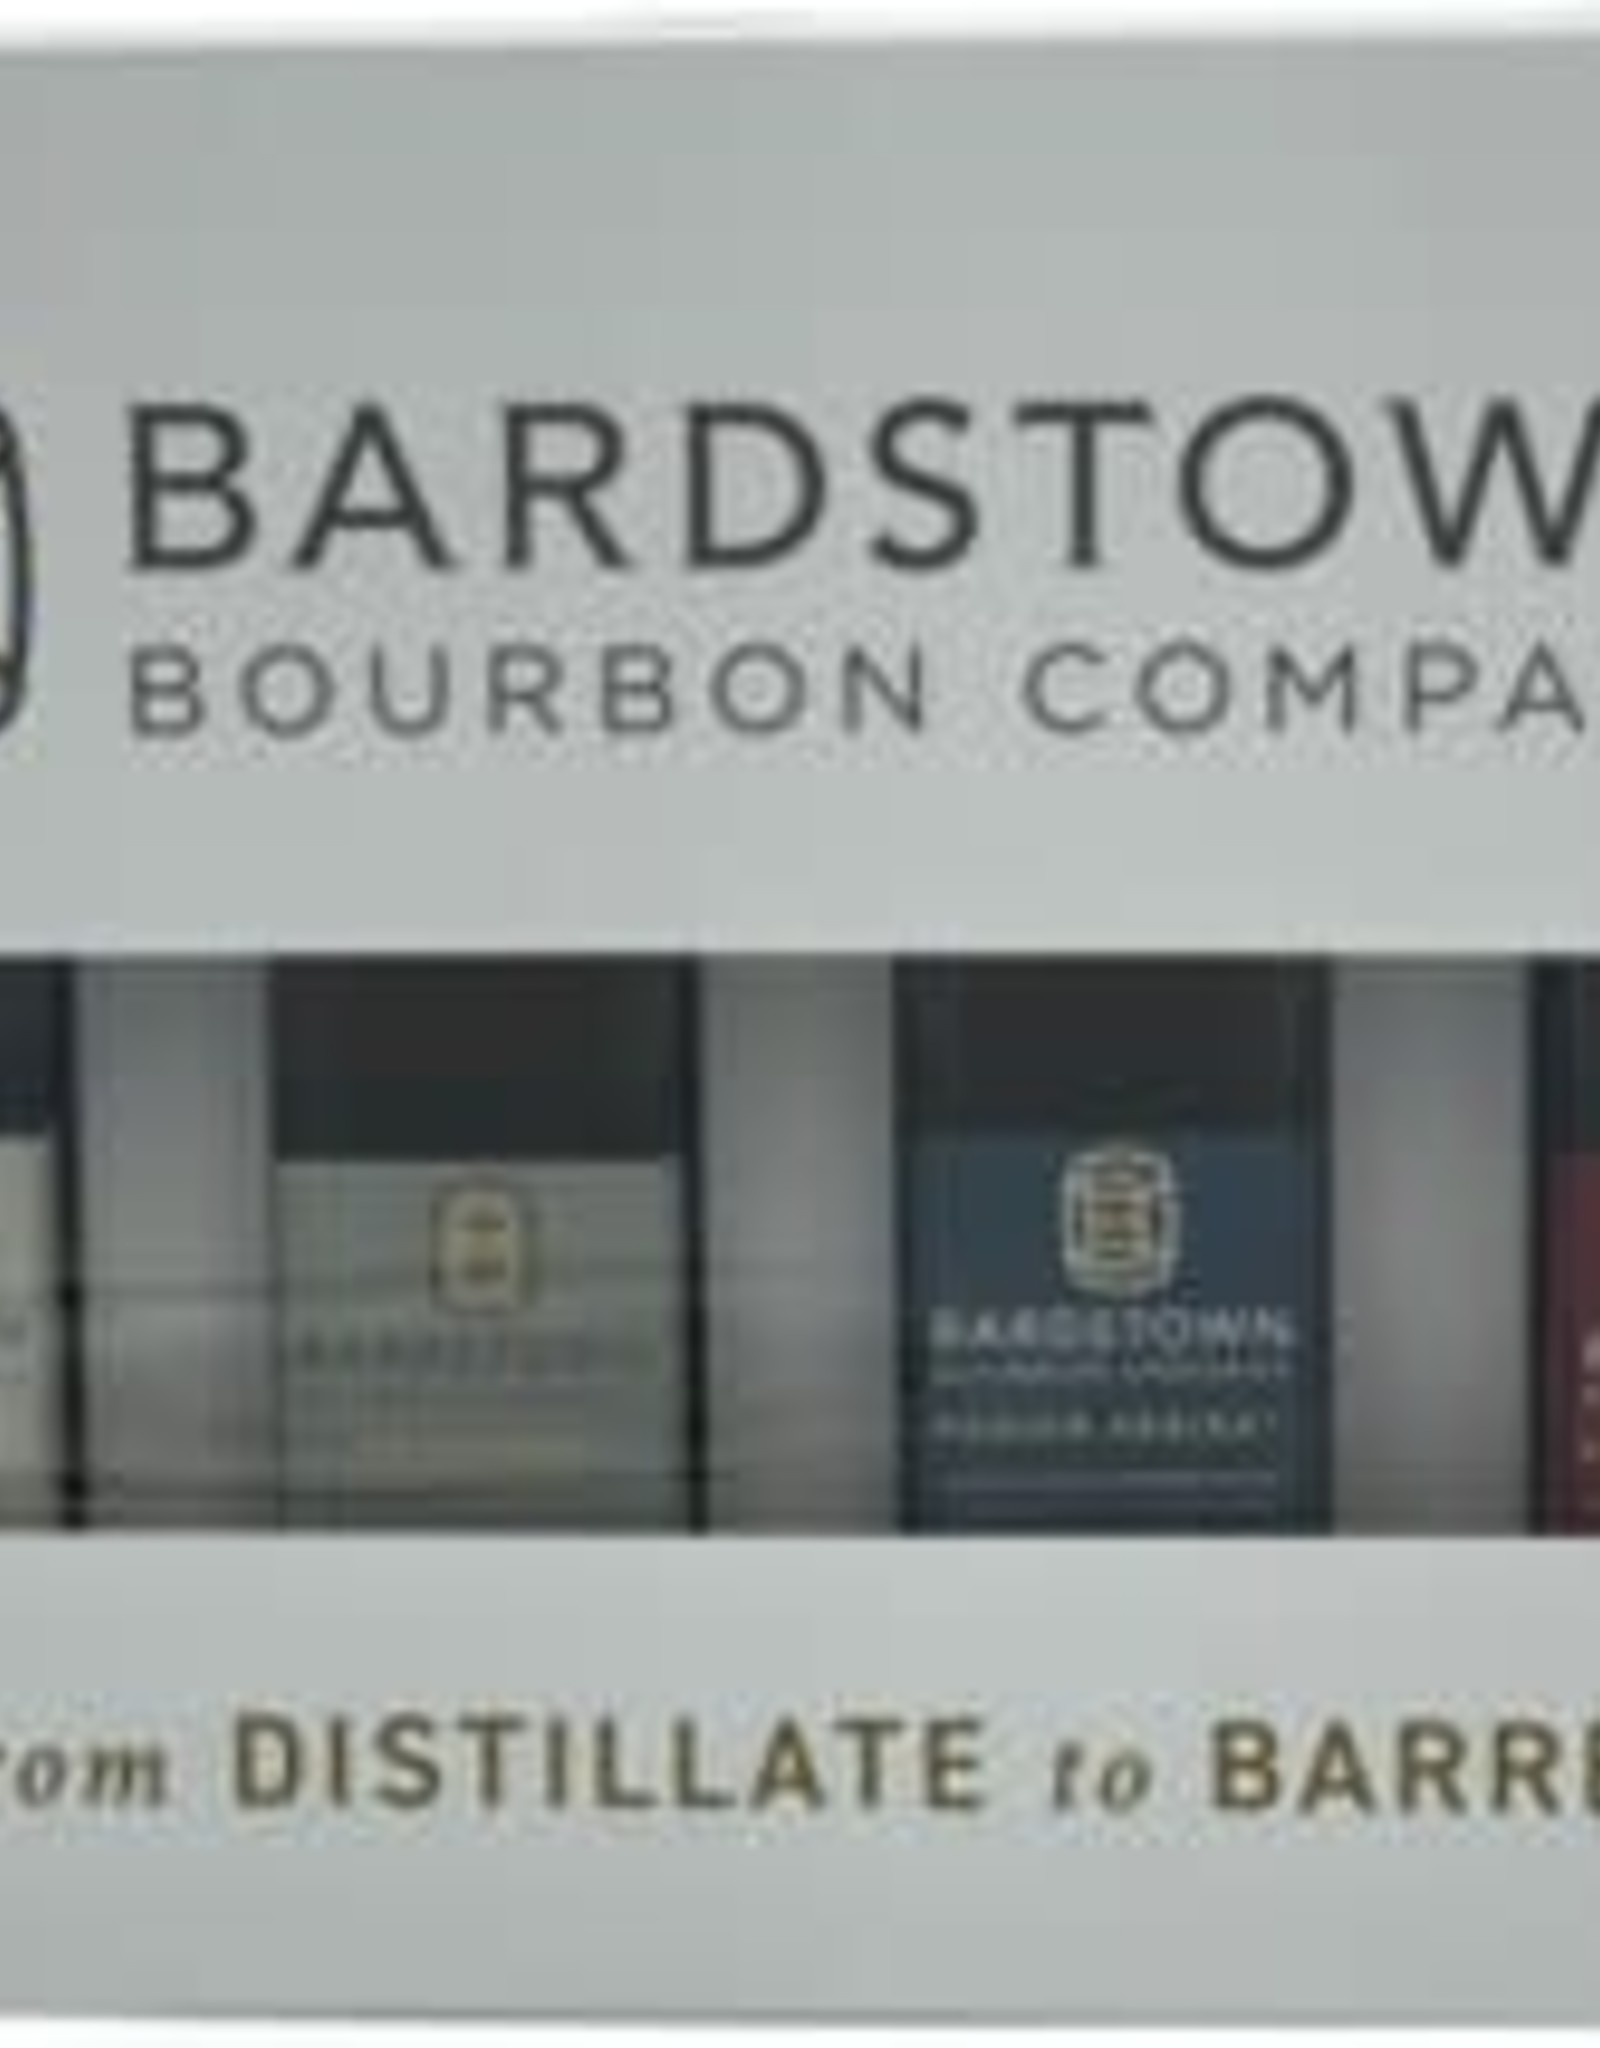 Bardstown  Whiskey Bardstown | From Distillate  to Barrel